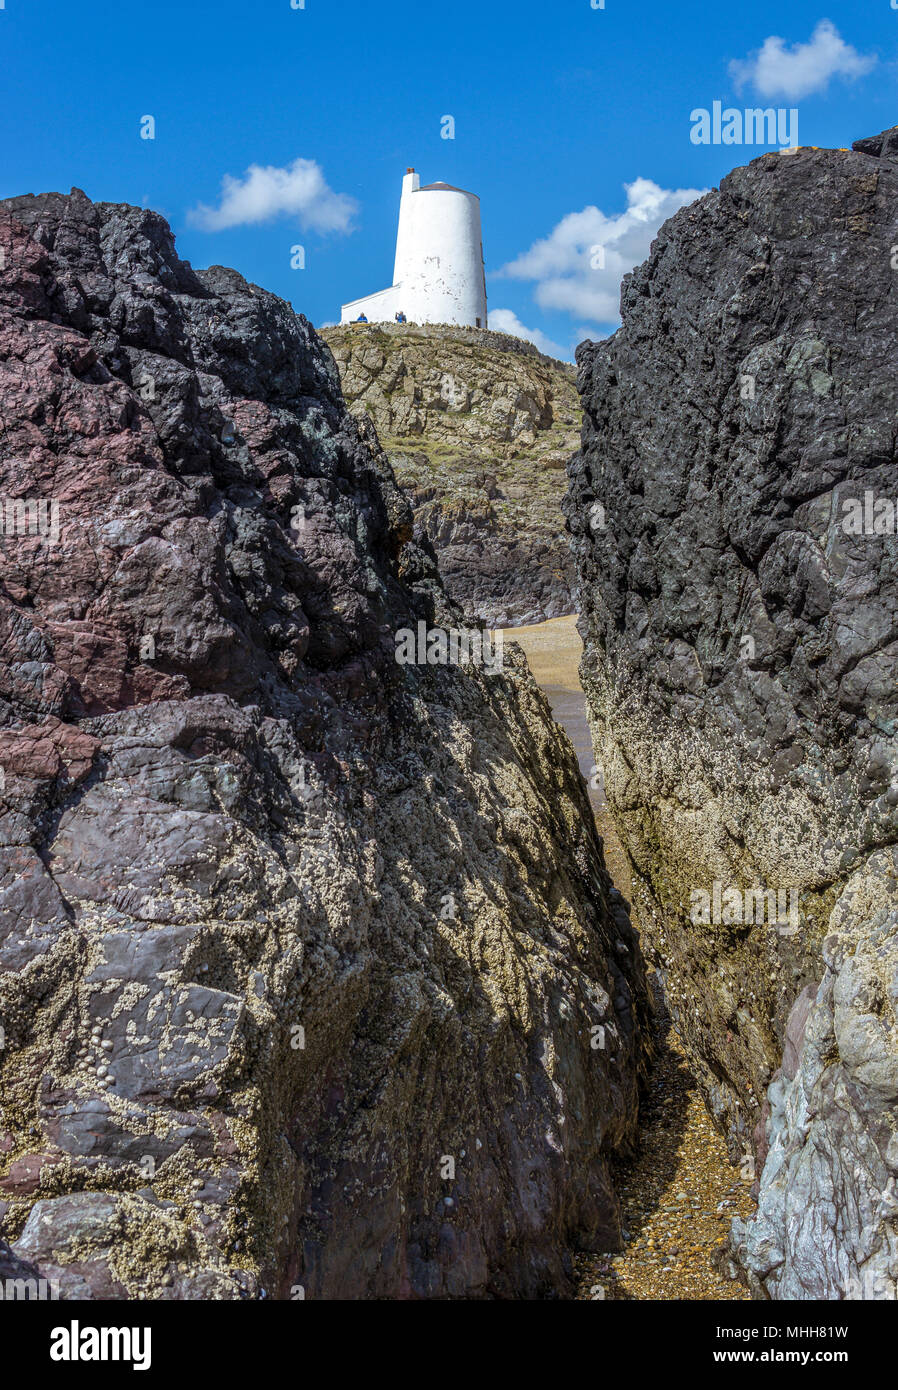 A view of Twr Mawr Lighthouse on Llanddwyn Island, Anglesey, North Wales through a gap in the volcanic lava pillars. Stock Photo